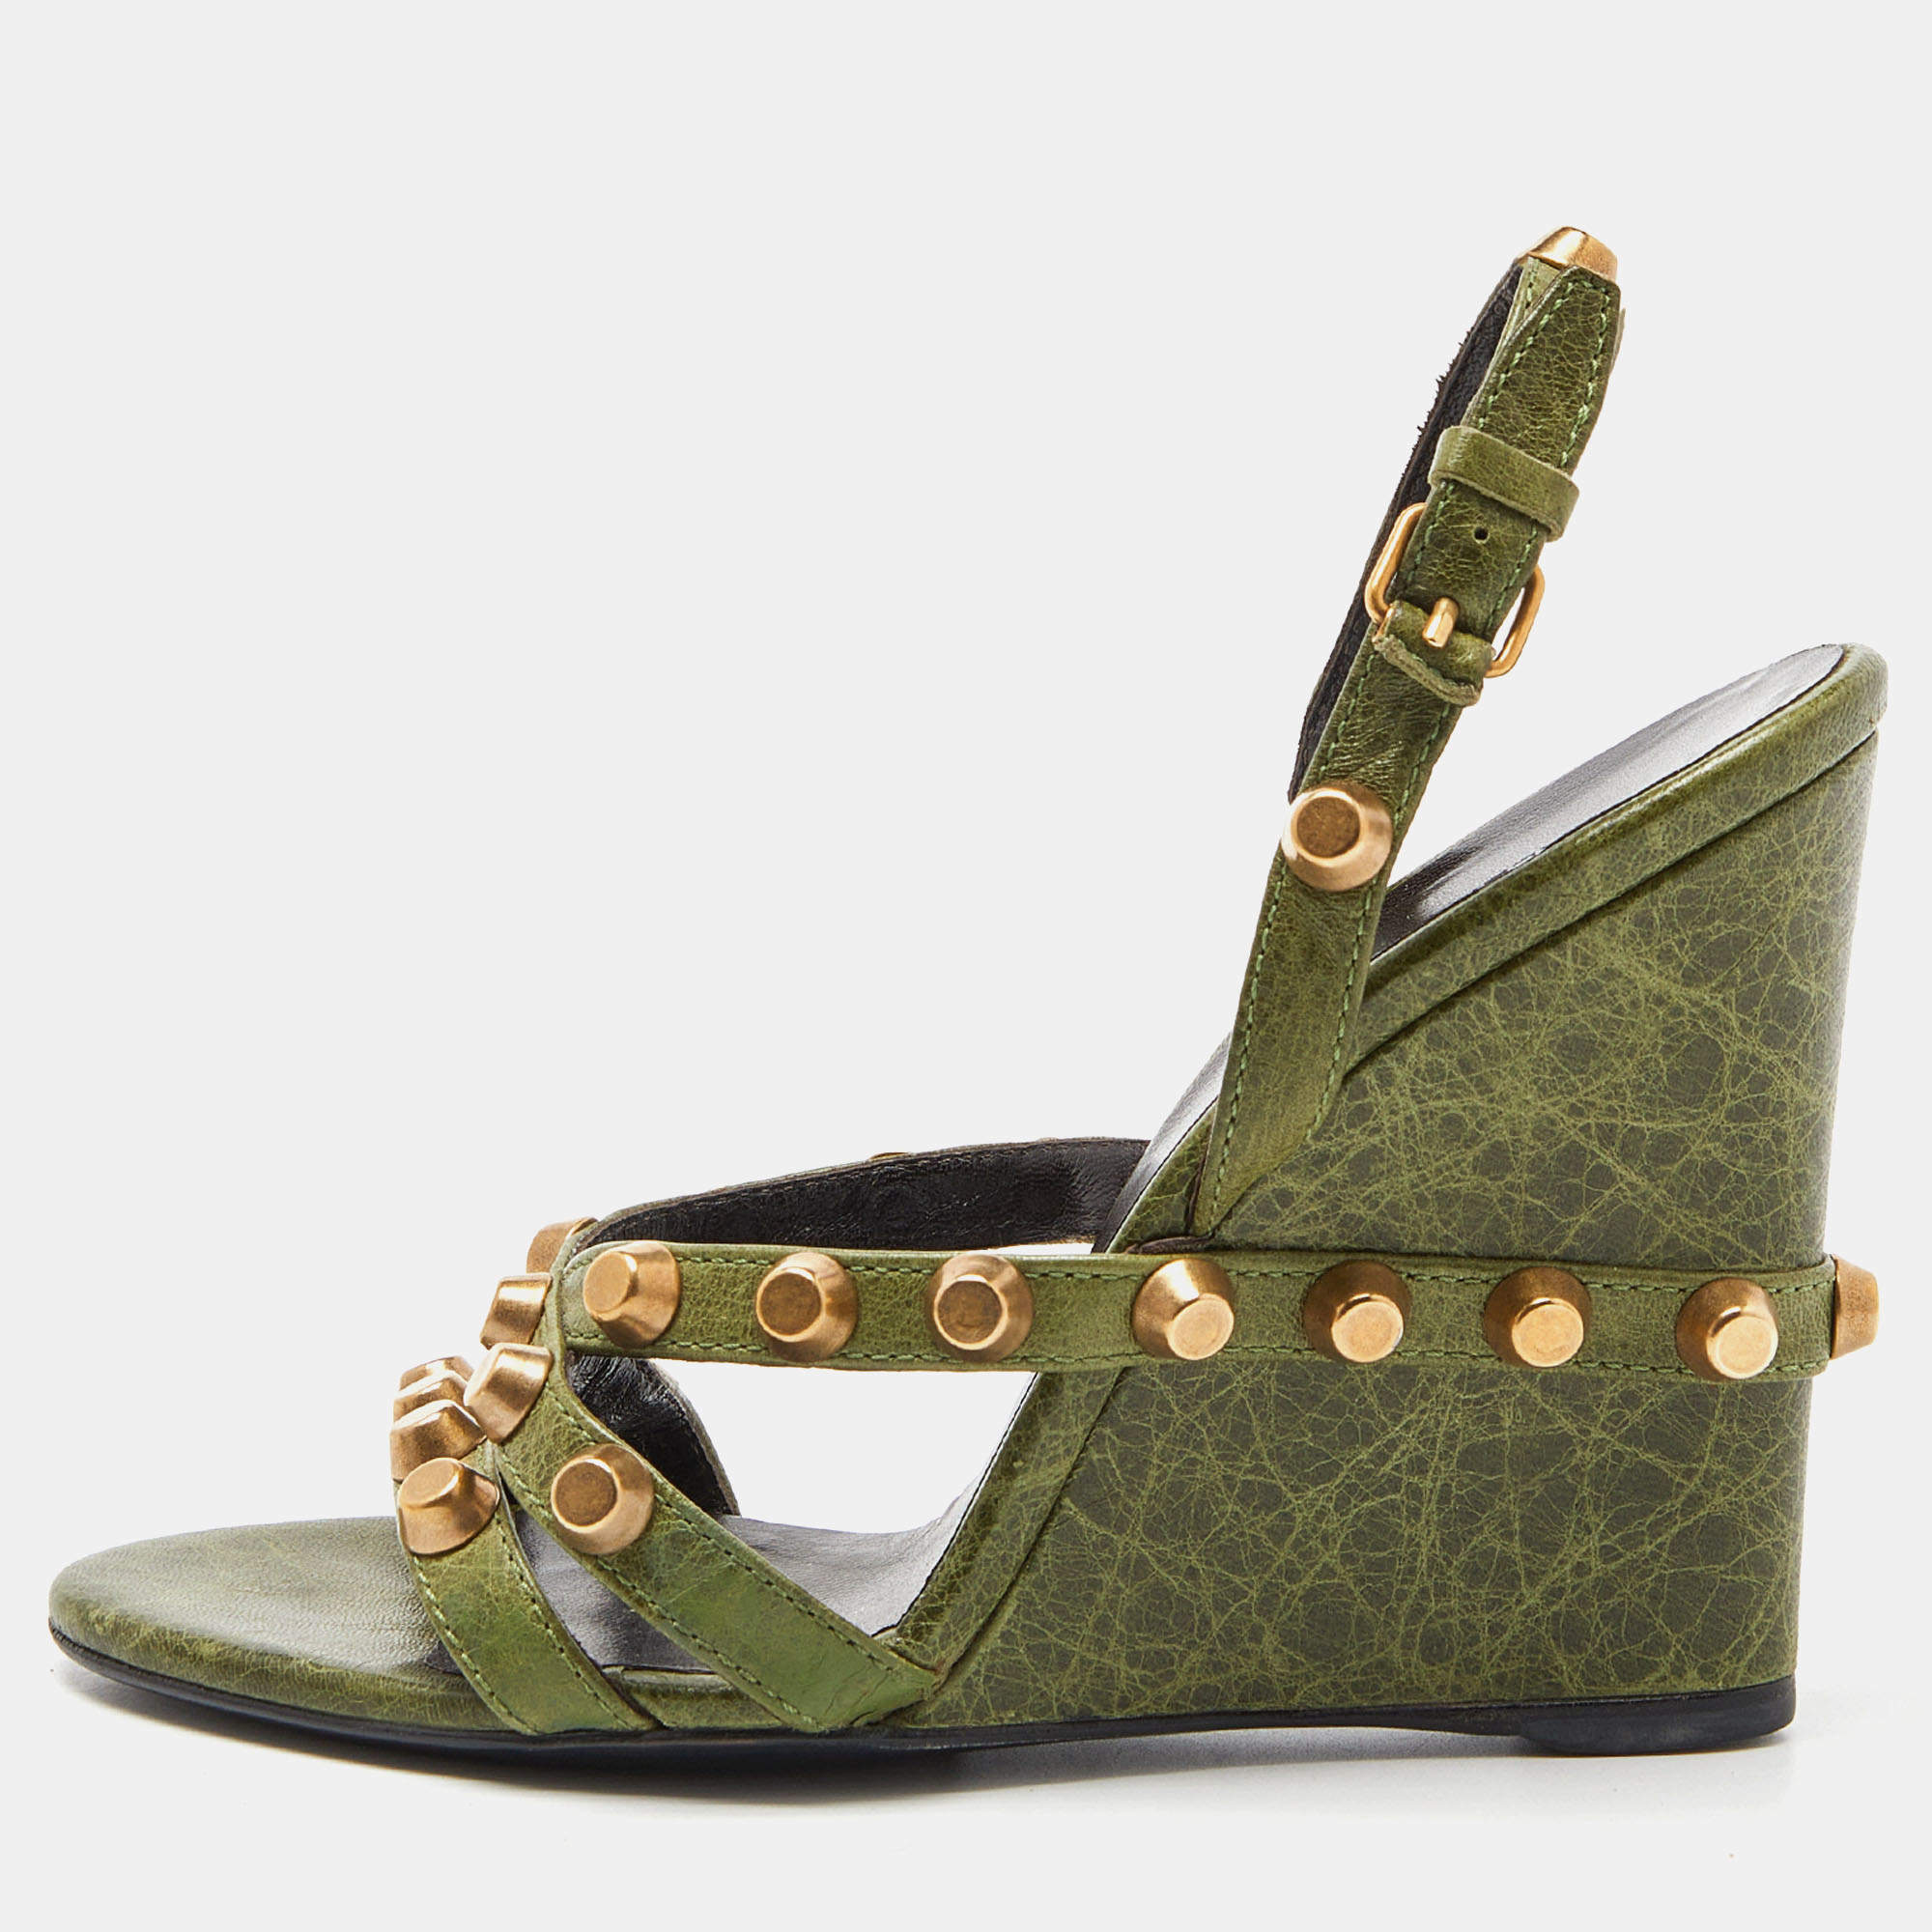 Balenciaga Green Leather Arena Studded Wedge Sandals Size 36.5